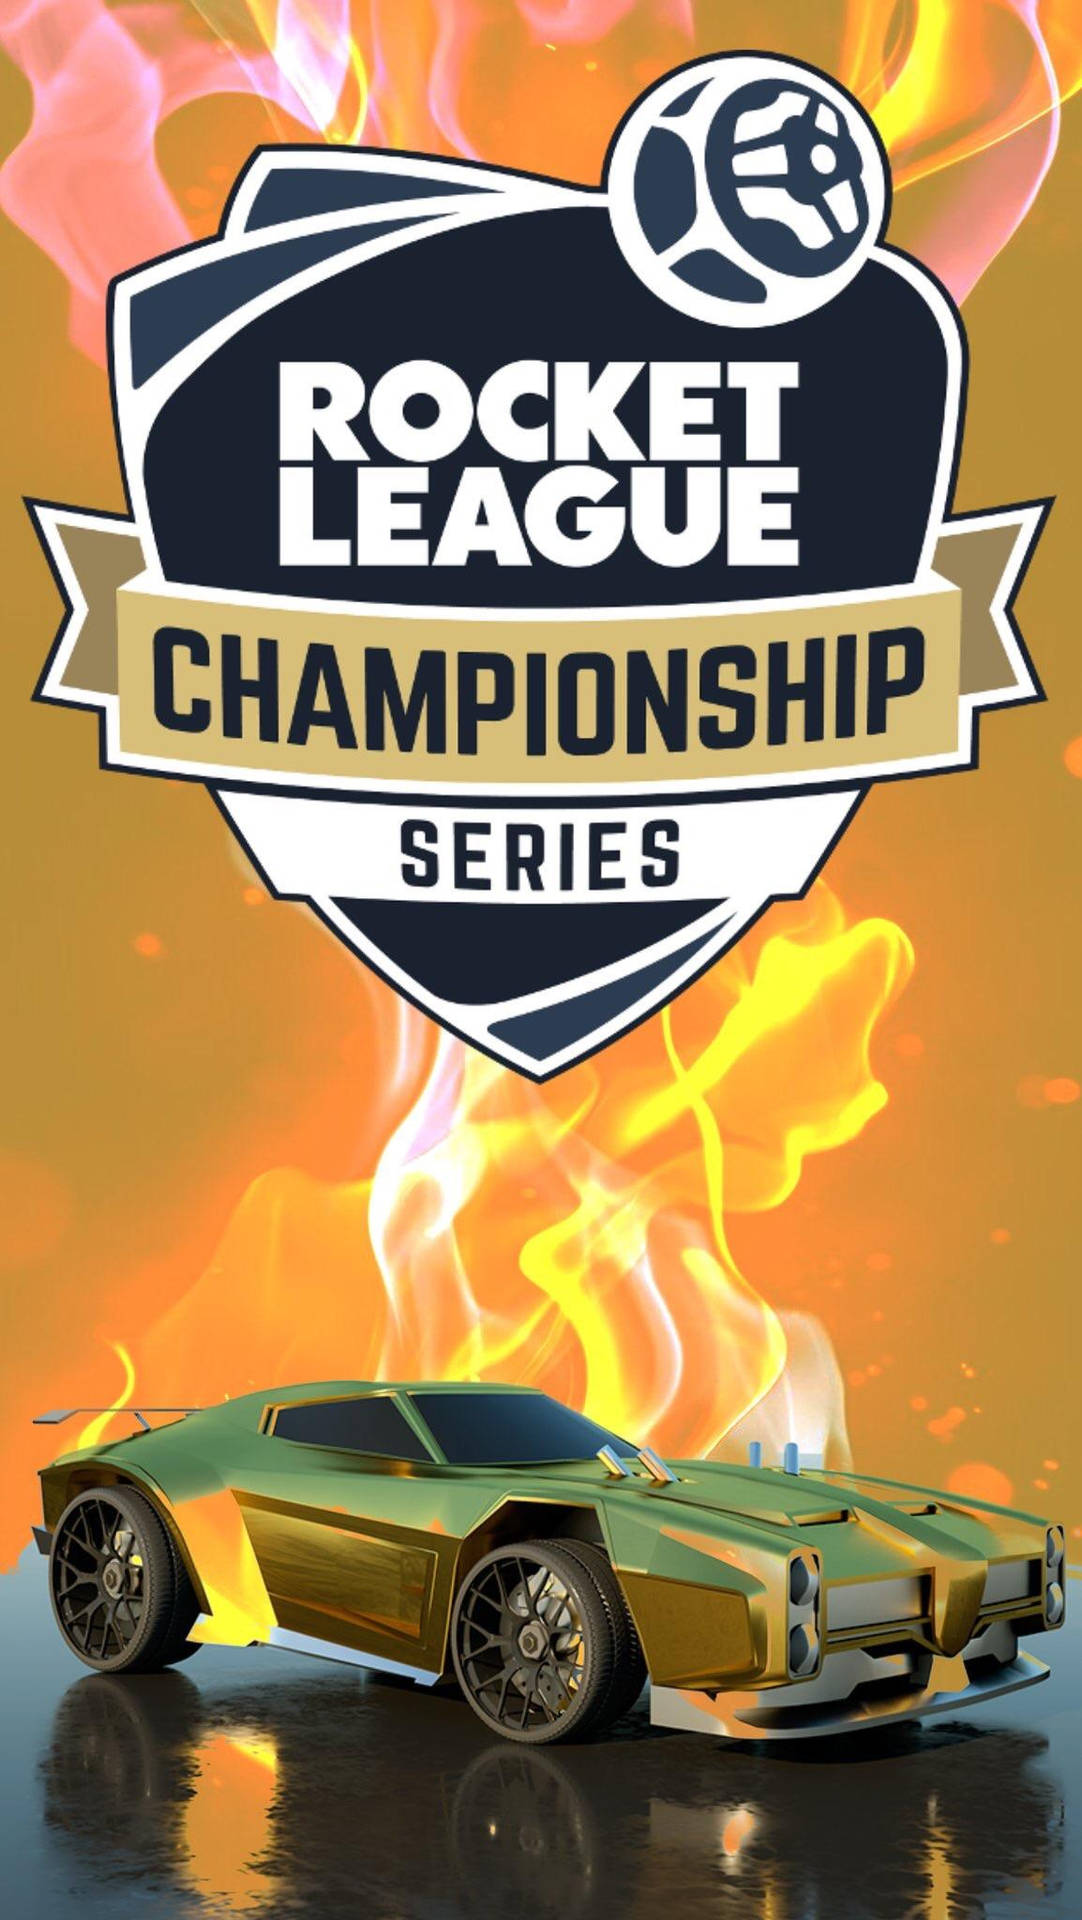 "Are you ready to dominate the new Rocket League season on your phone?" Wallpaper